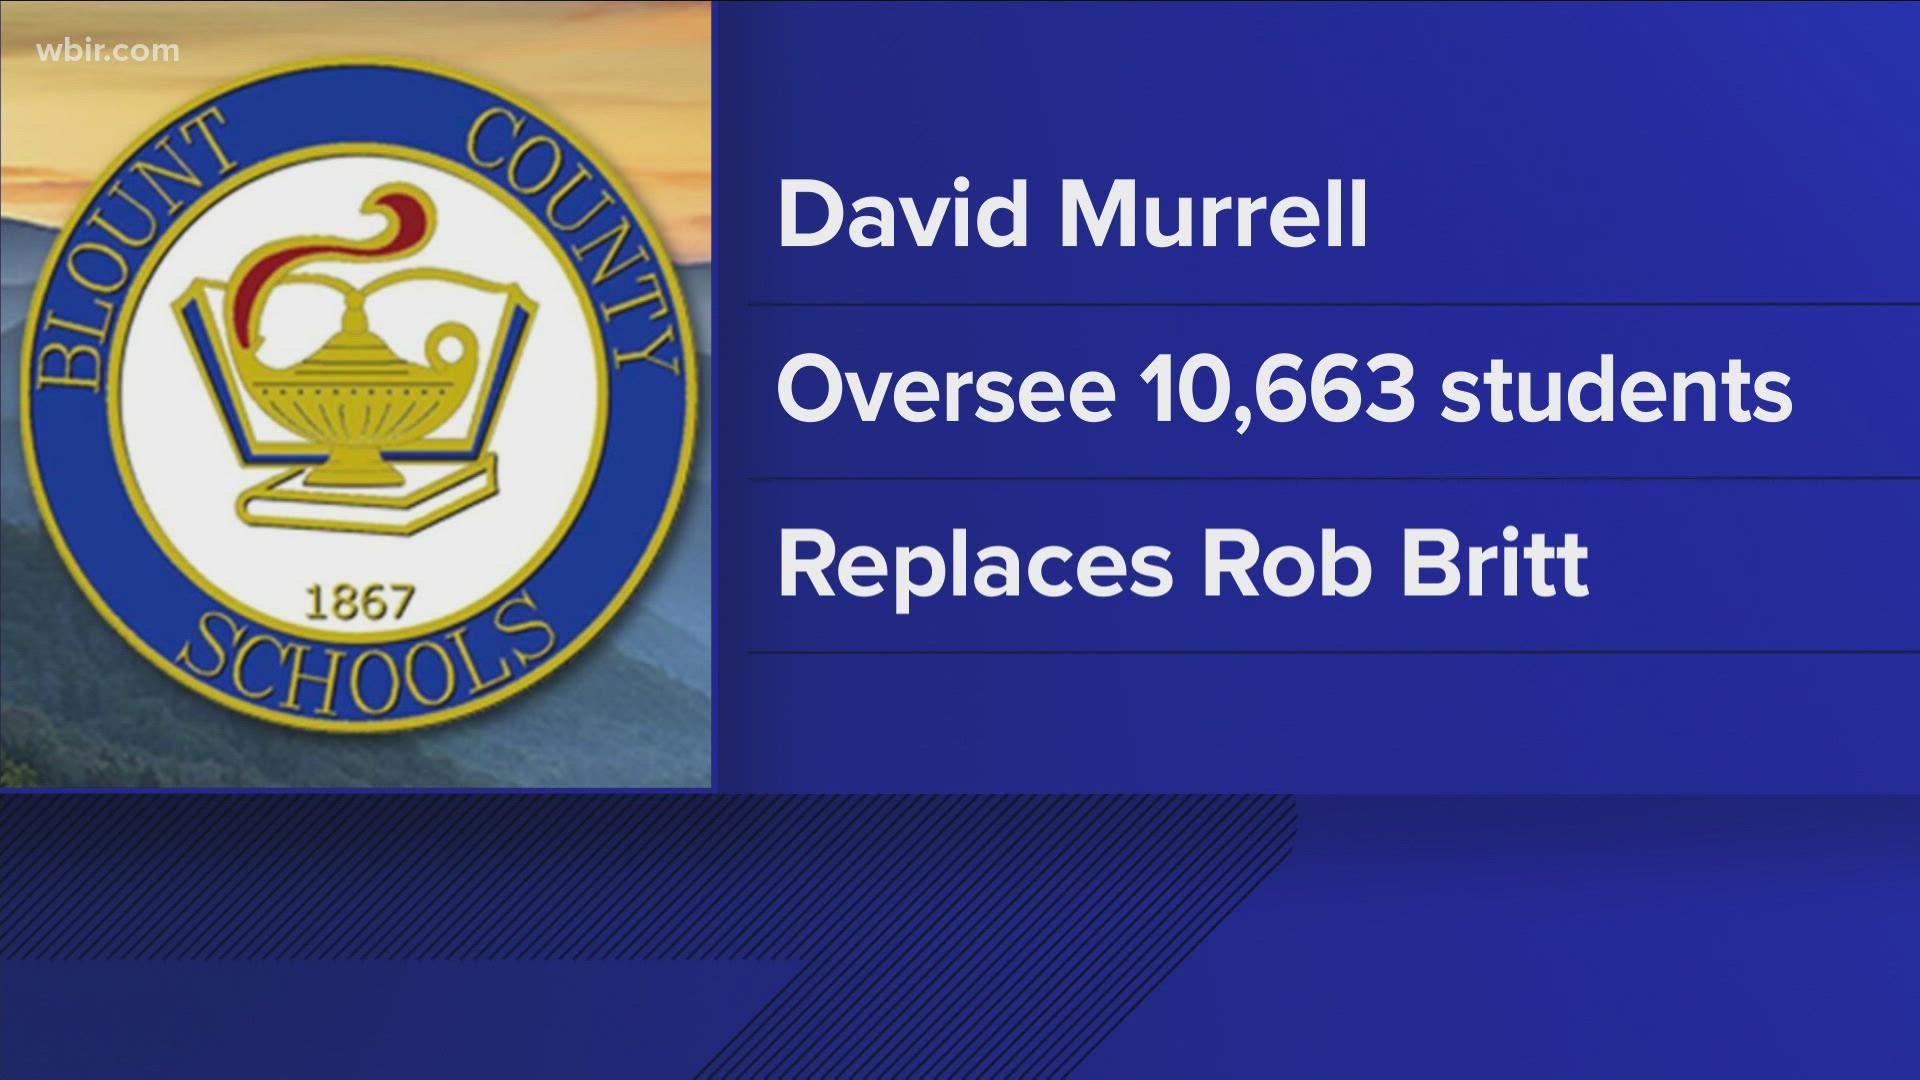 The Board of Education announced they've entered contract negotiations with David Murrell.